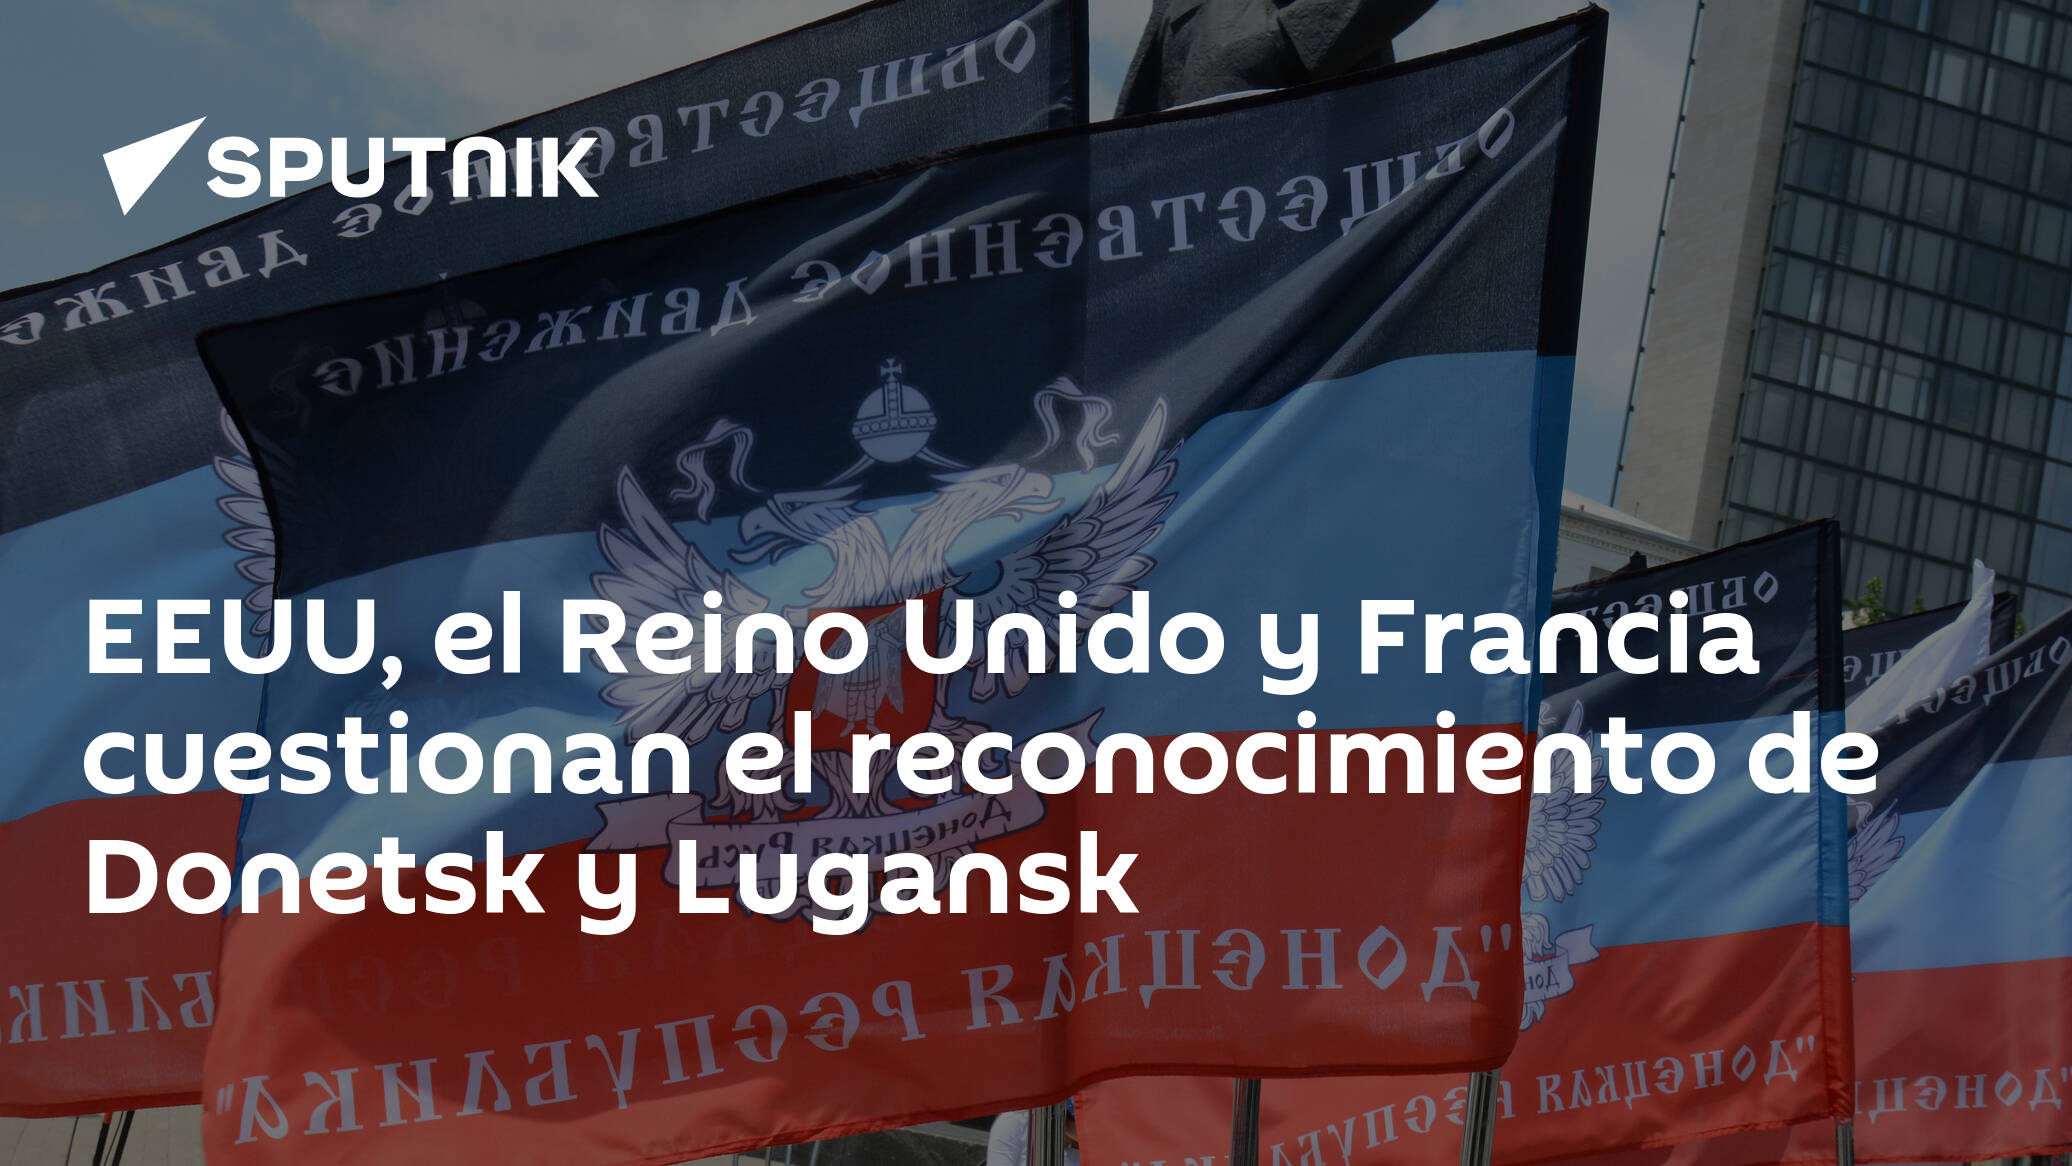 The United States, the United Kingdom and France question the recognition of Donetsk and Lugansk